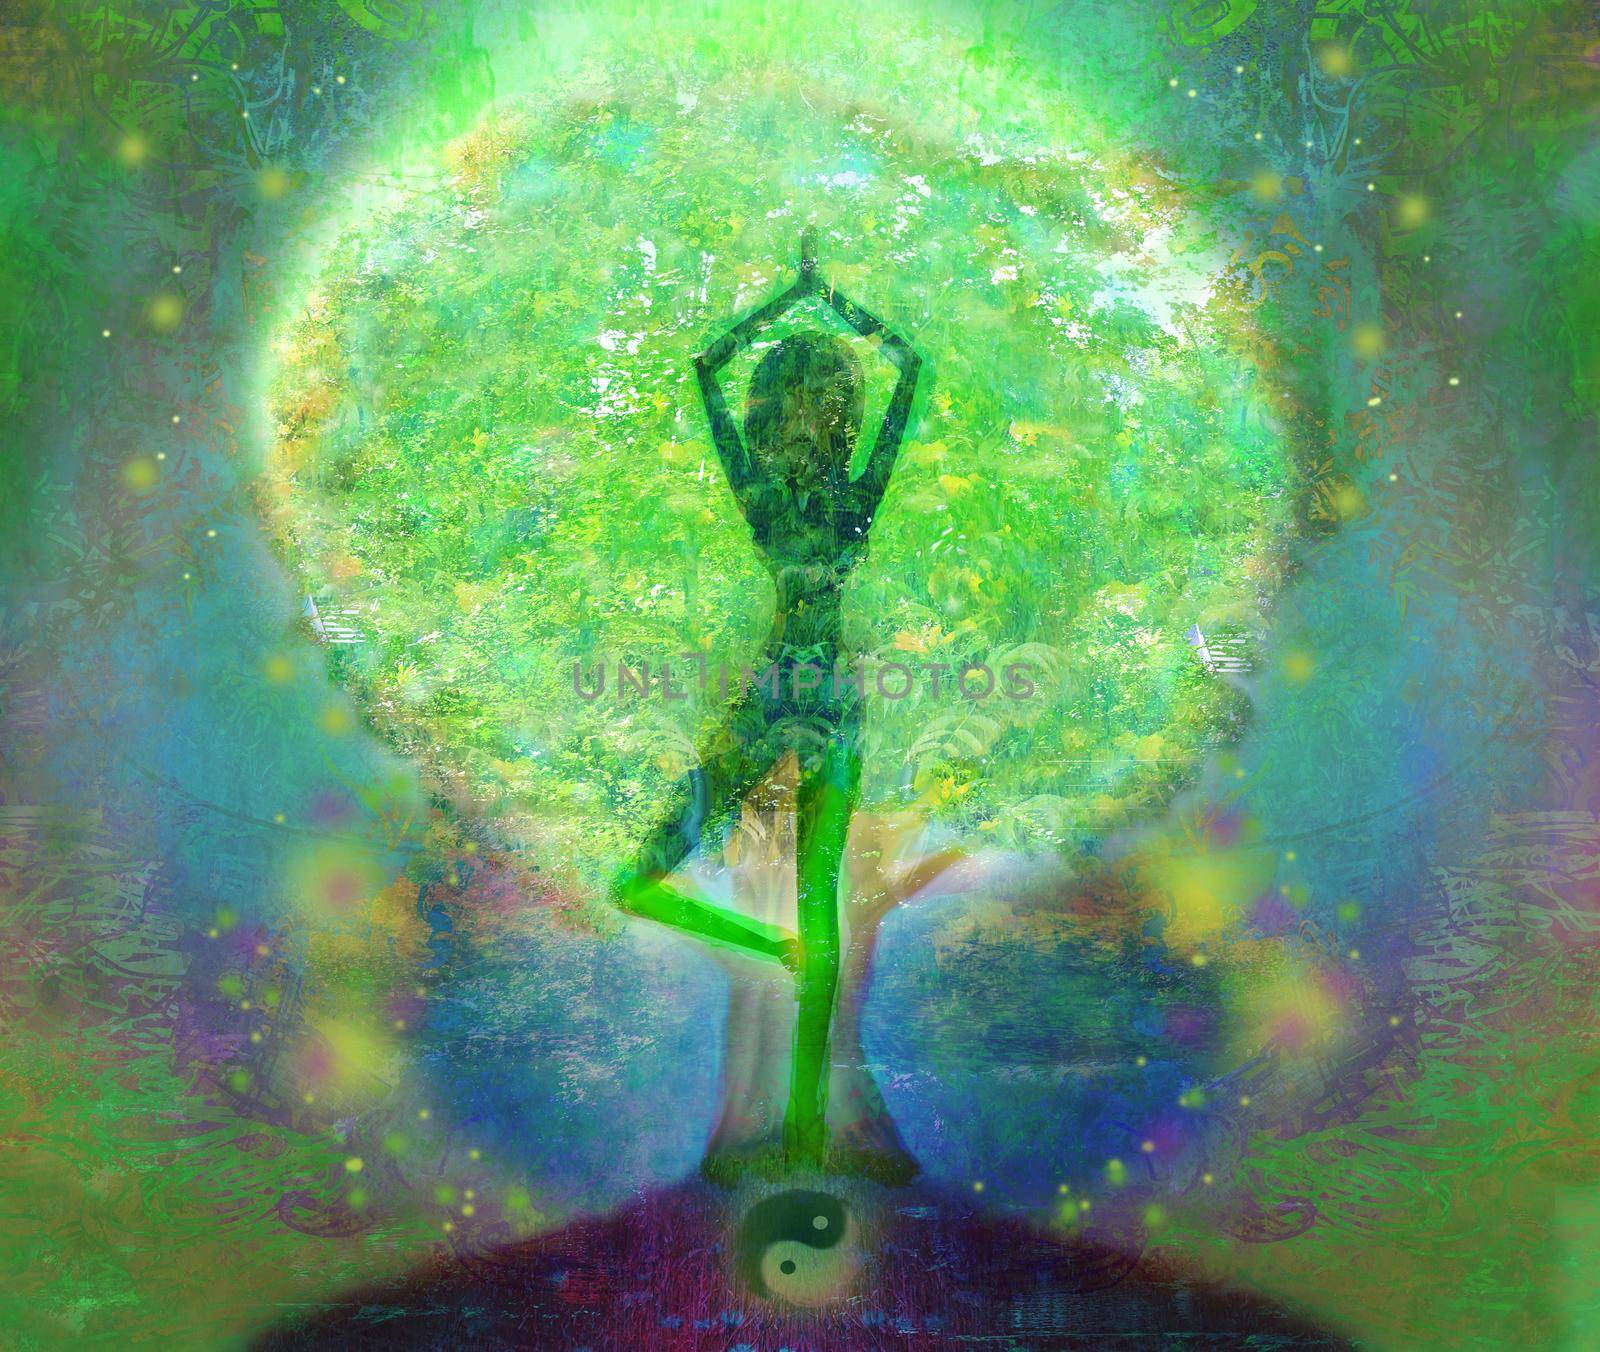 Yoga Tree of Life by JackyBrown